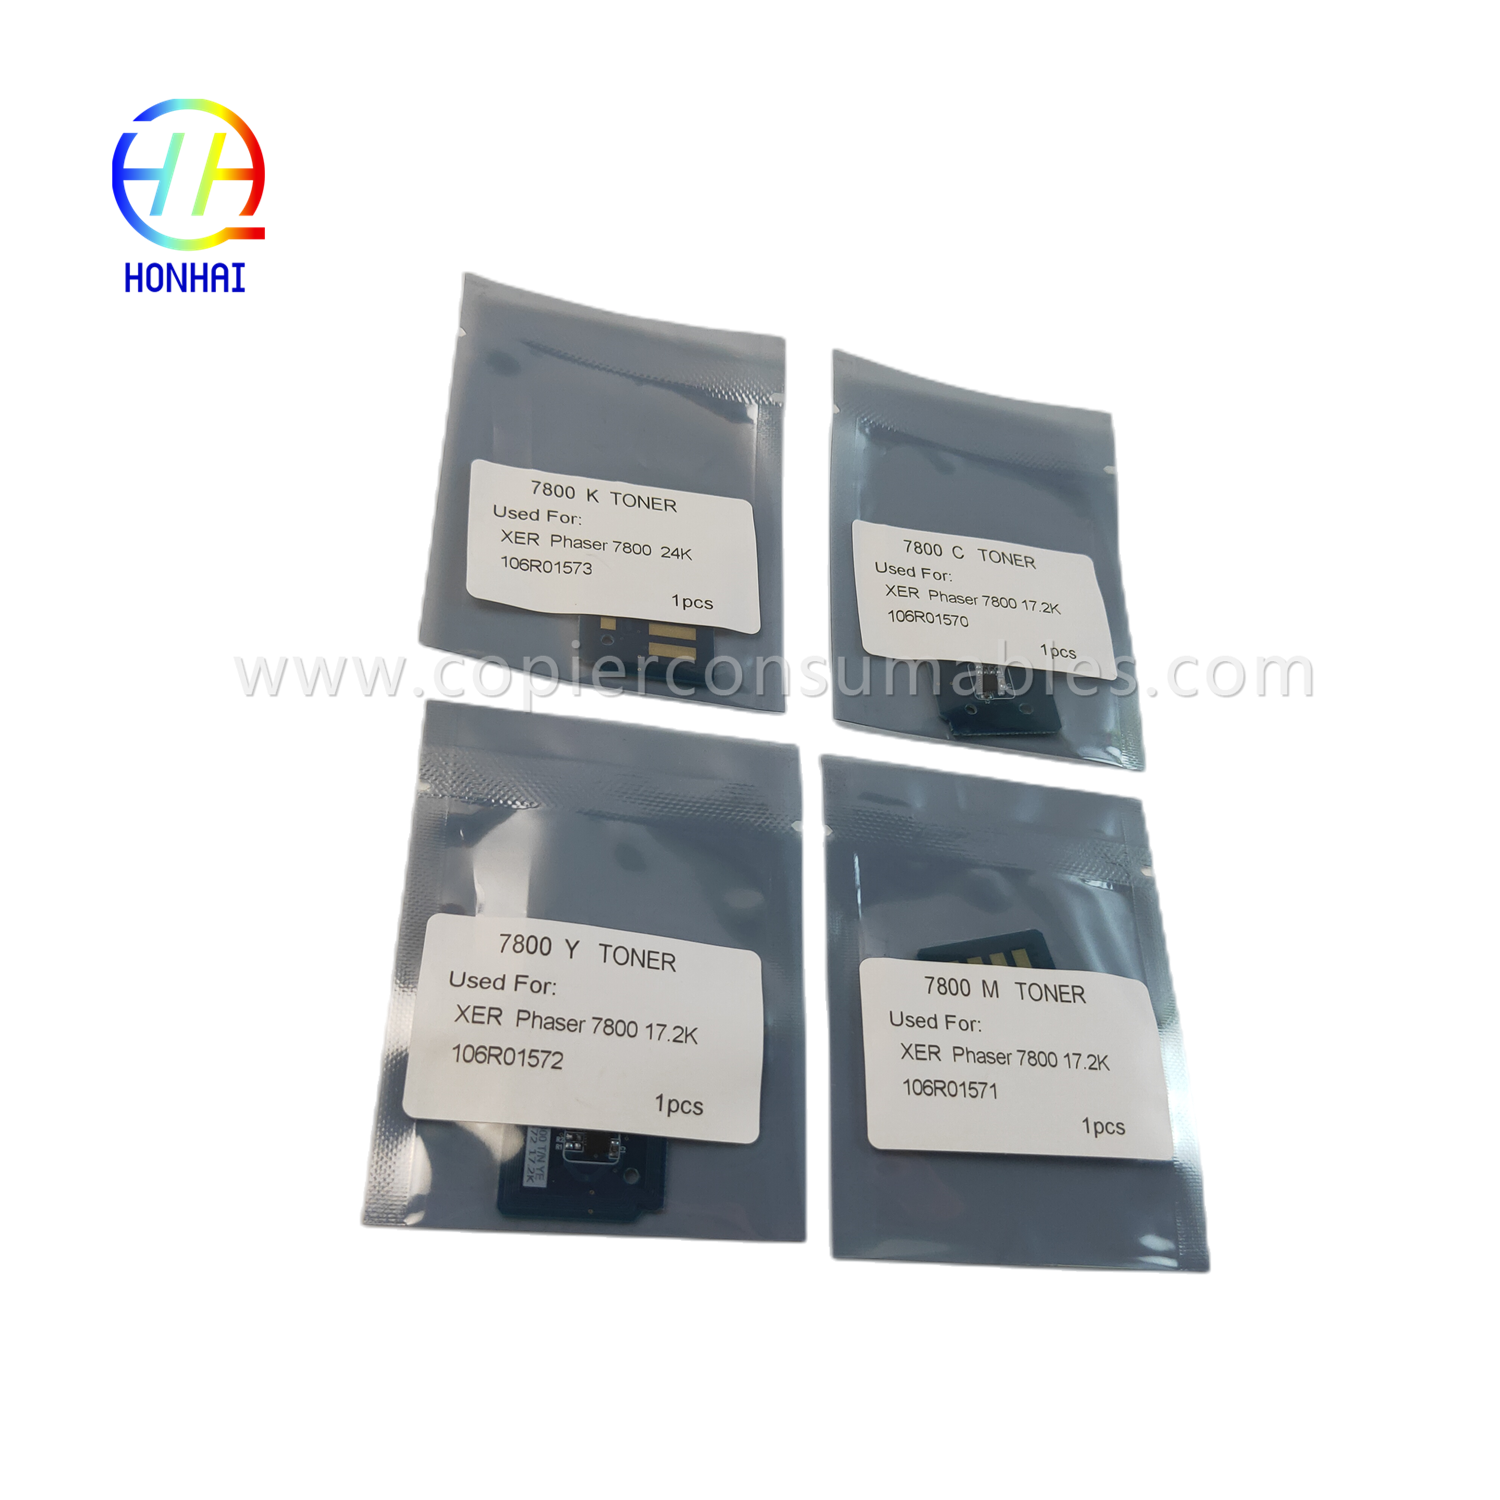 Toner Chip (set) for Xerox Phaser 7800 106R01573 106R01570 106R01571 106R01572 Chip